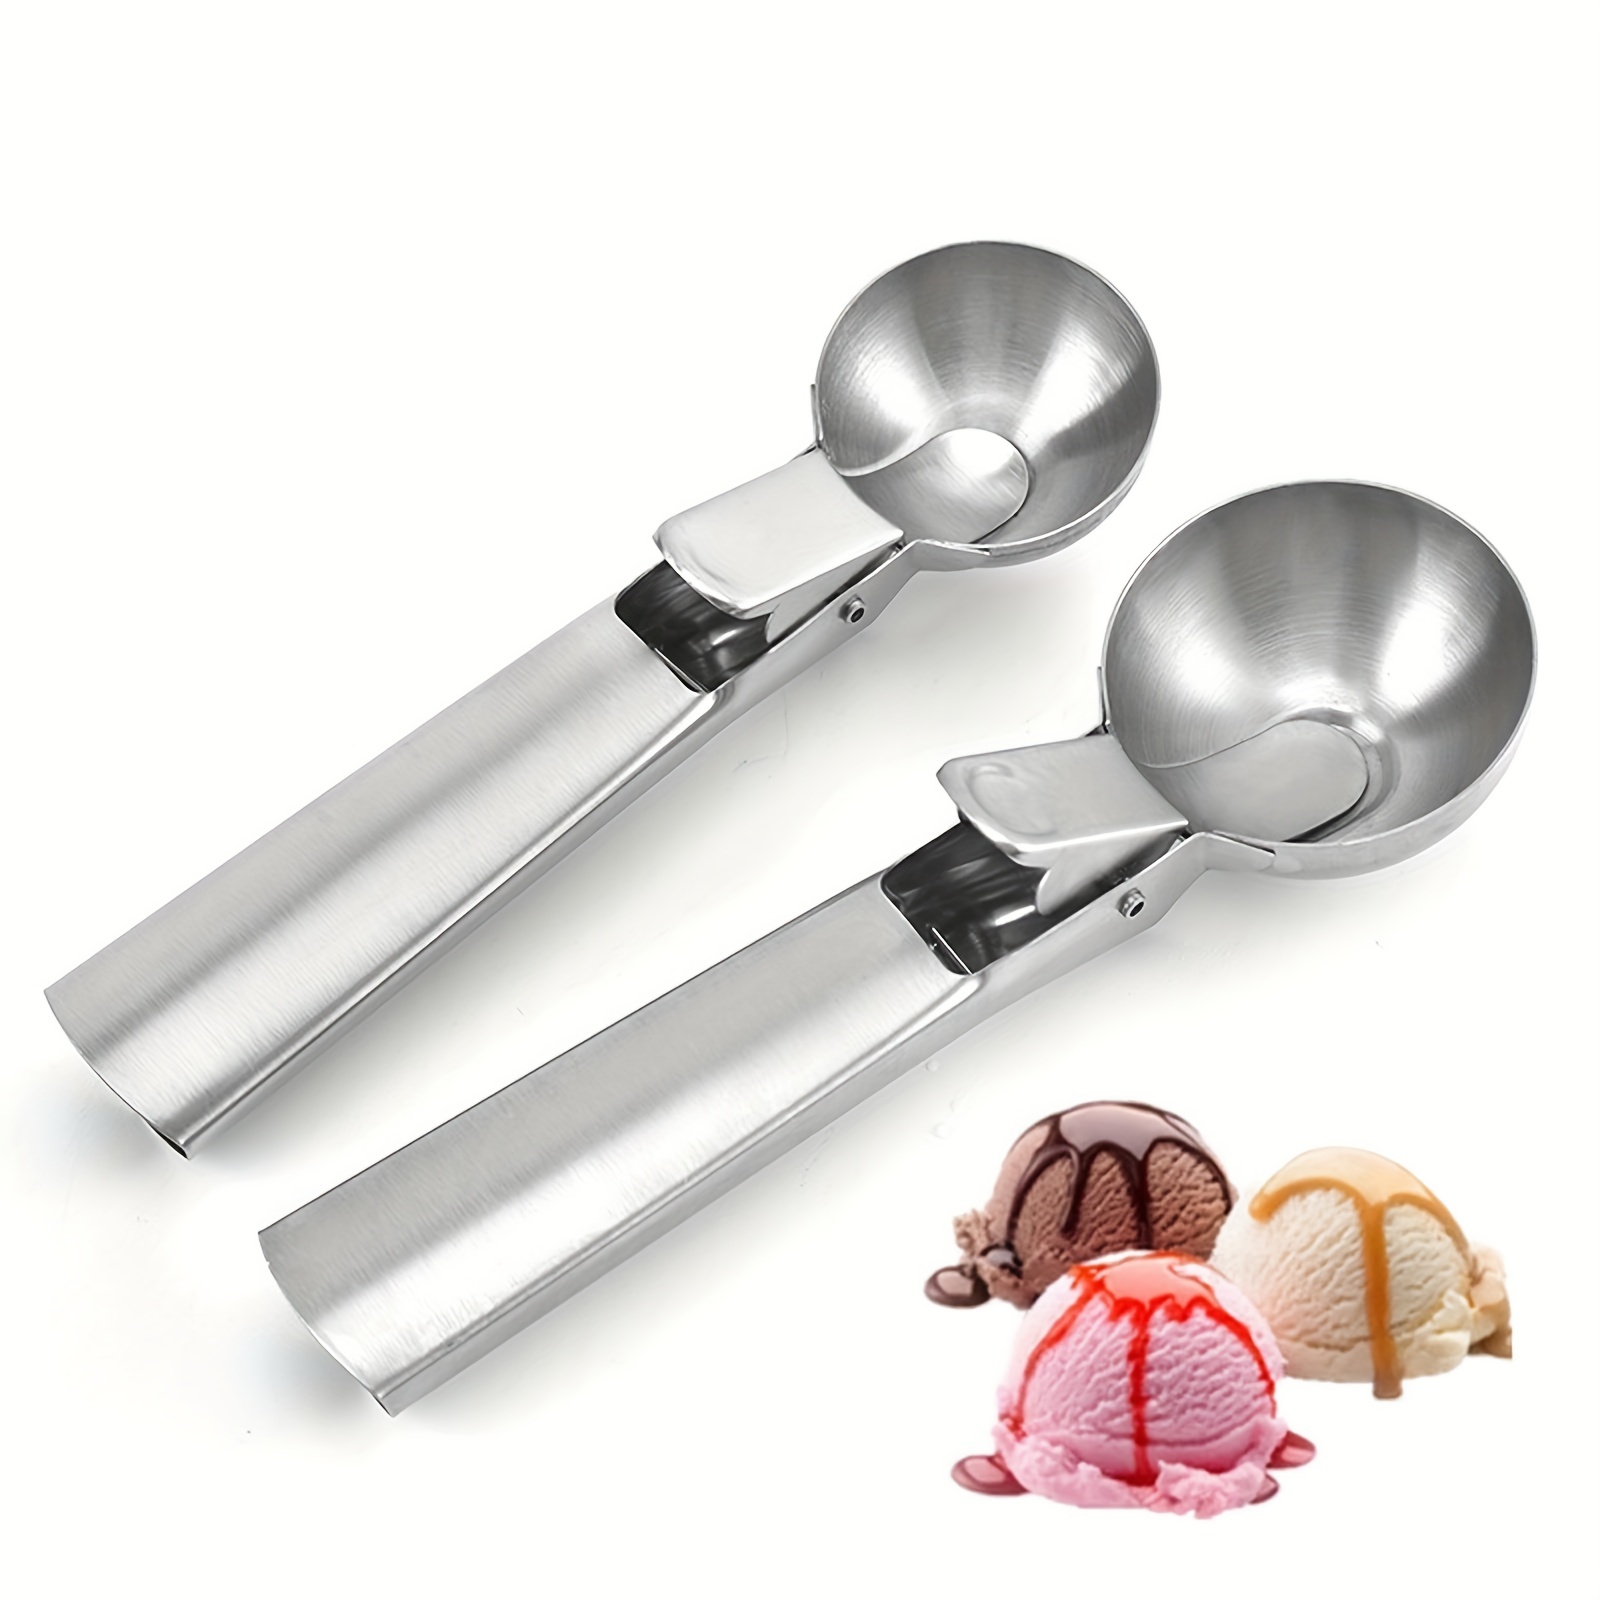 Stainless Steel Ice Cream Scoop Set with Trigger